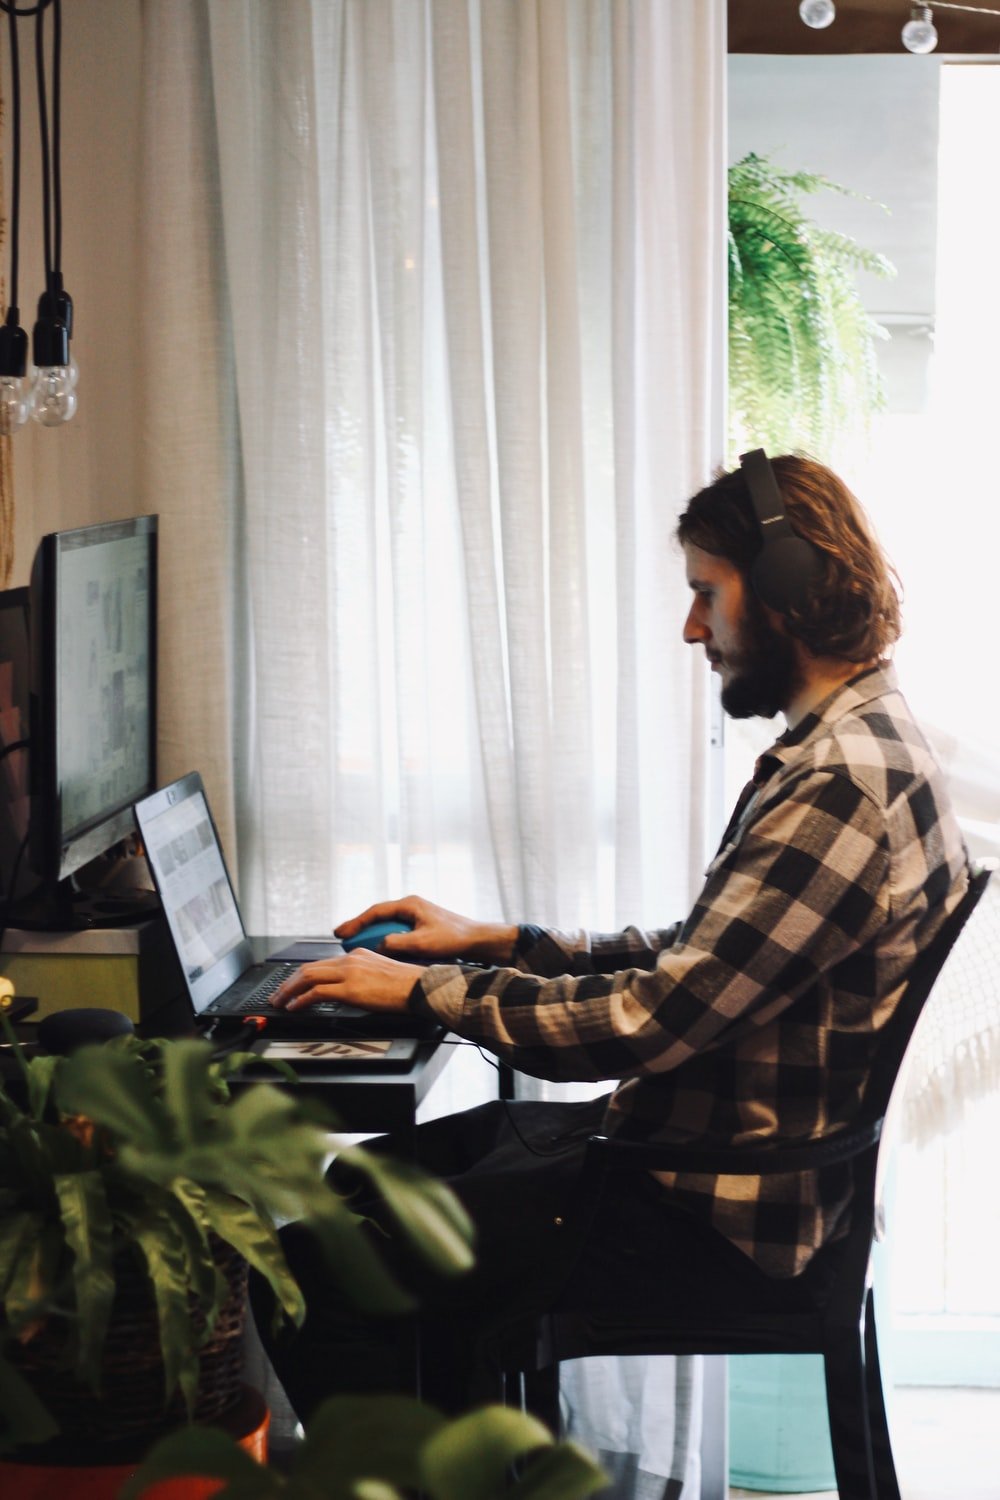 Prevent Eye Strain While Working from Home